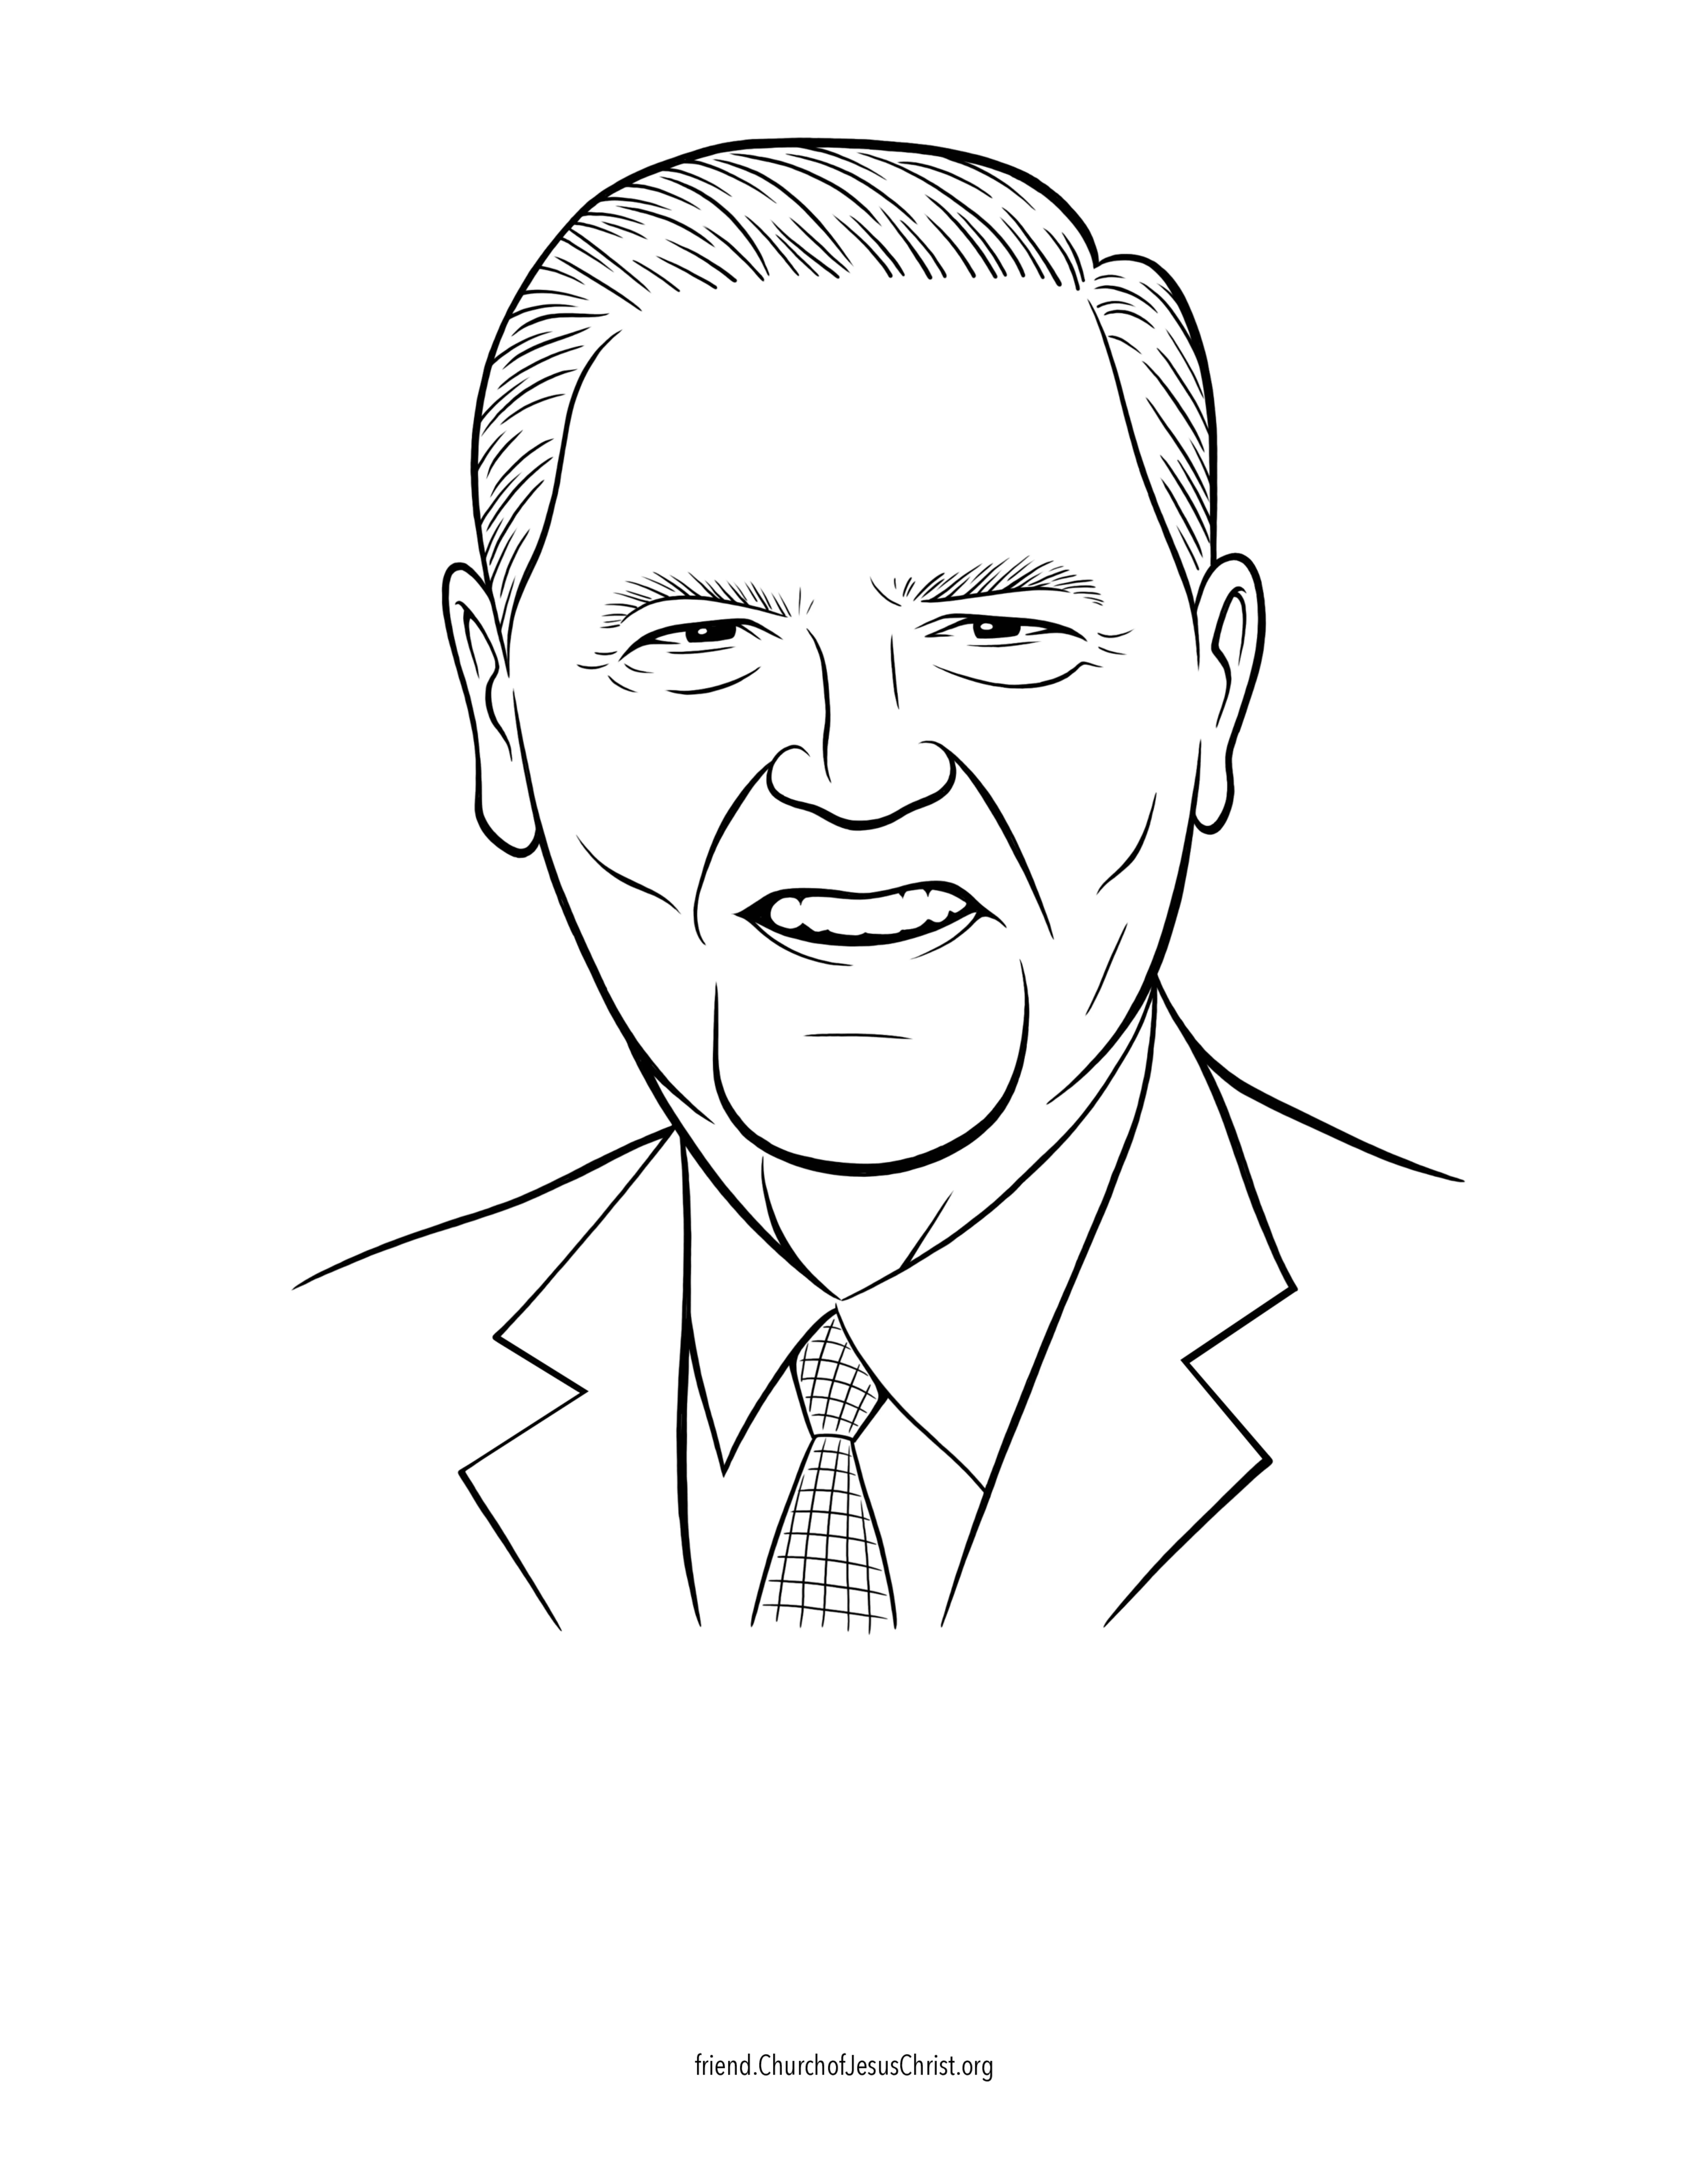 A coloring page of the official portrait of Jeffrey R. Holland.